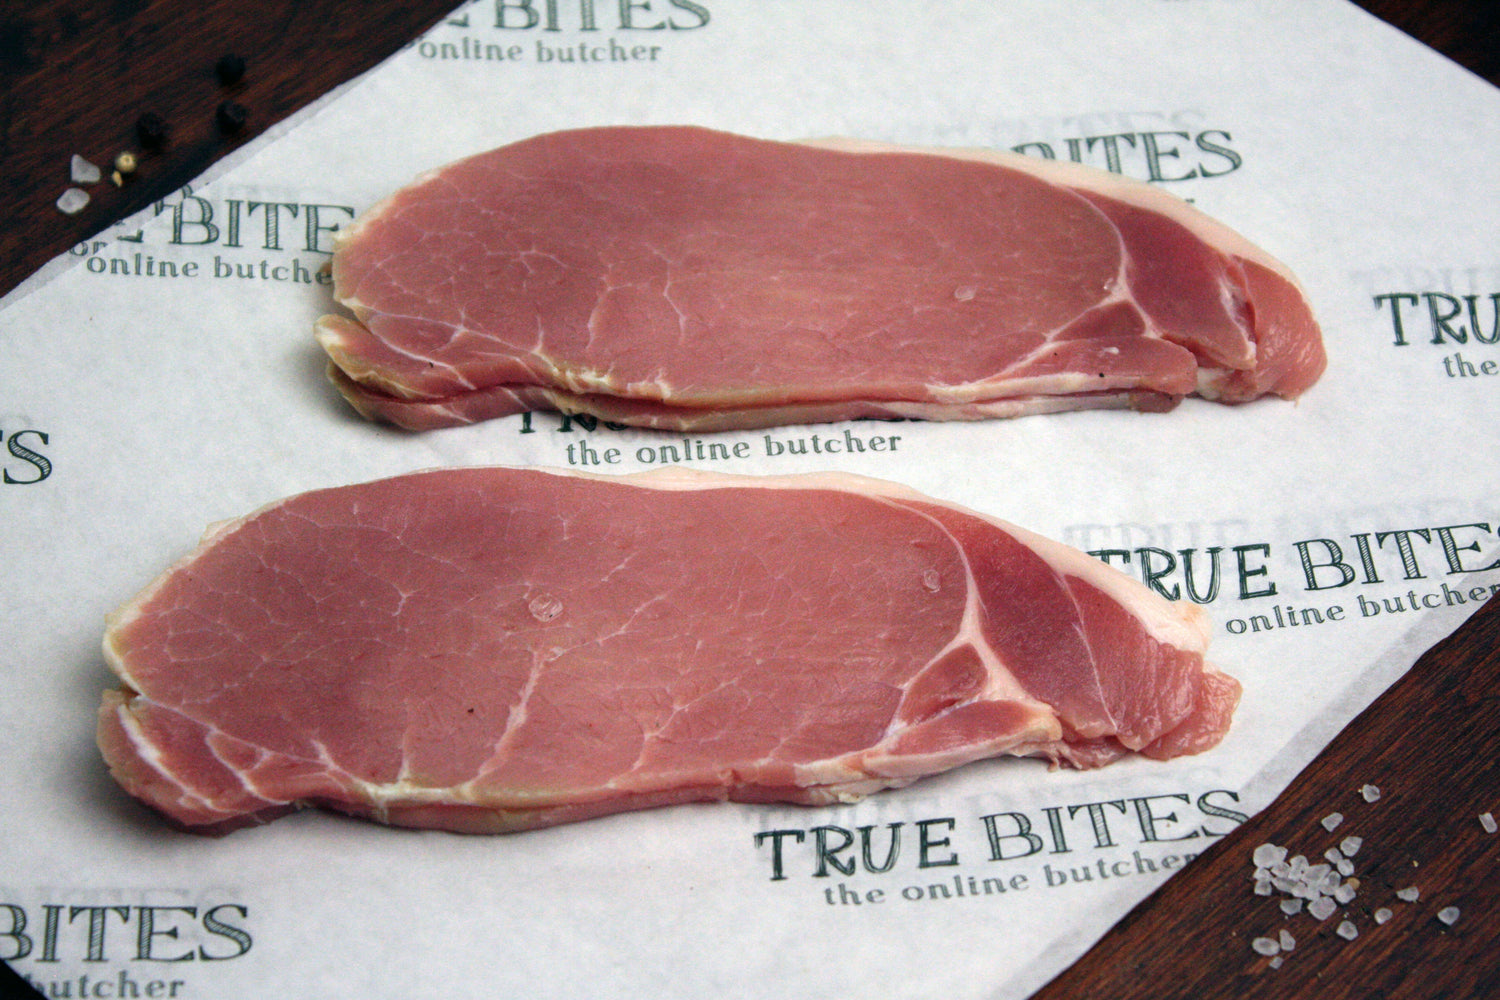 dry cured back bacon sitting on true bites branded greaseproof paper